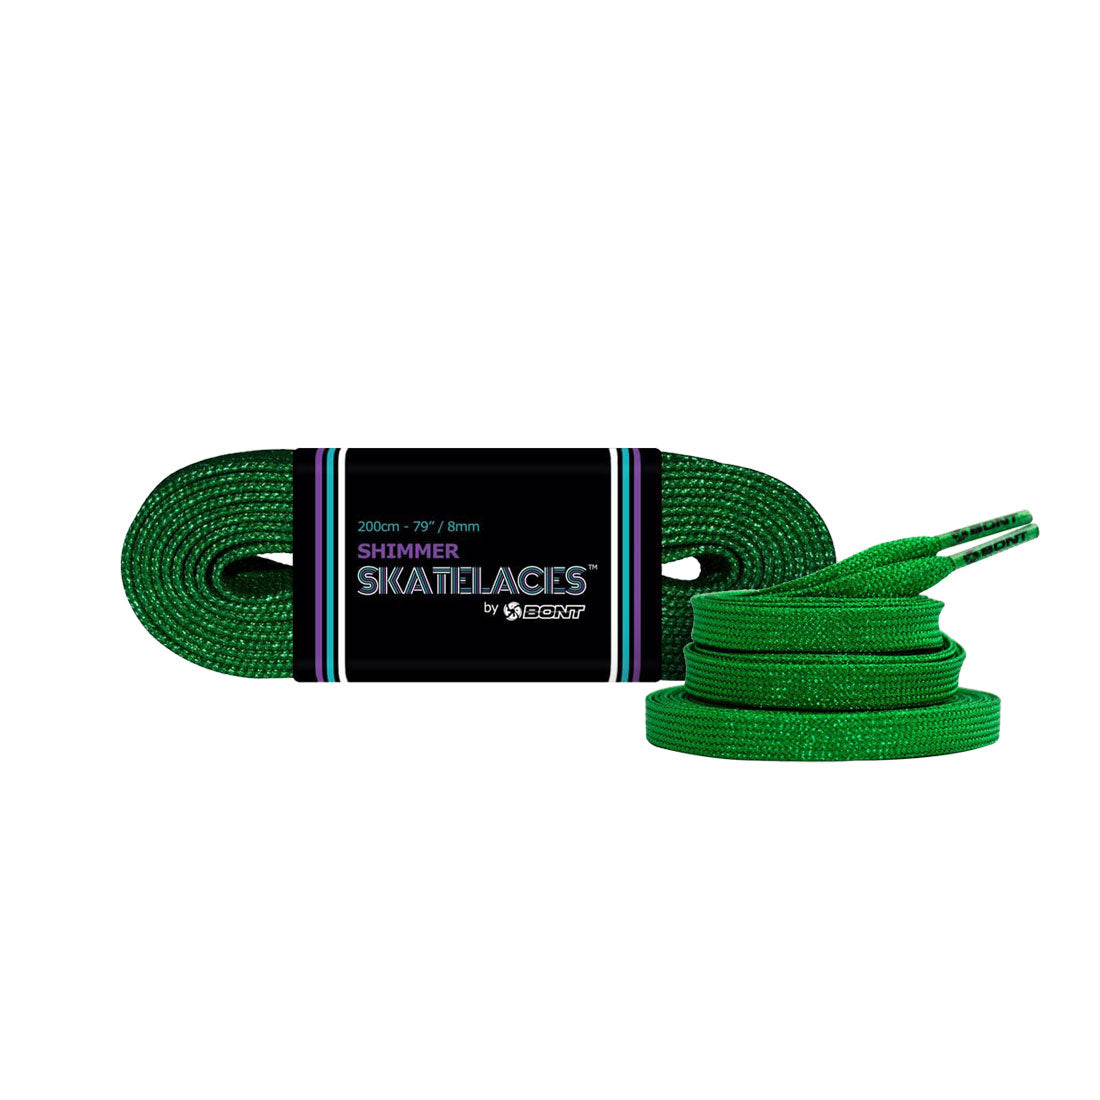 Bont Shimmer 8mm Laces - 275cm/108in Tinkerbell Green Laces